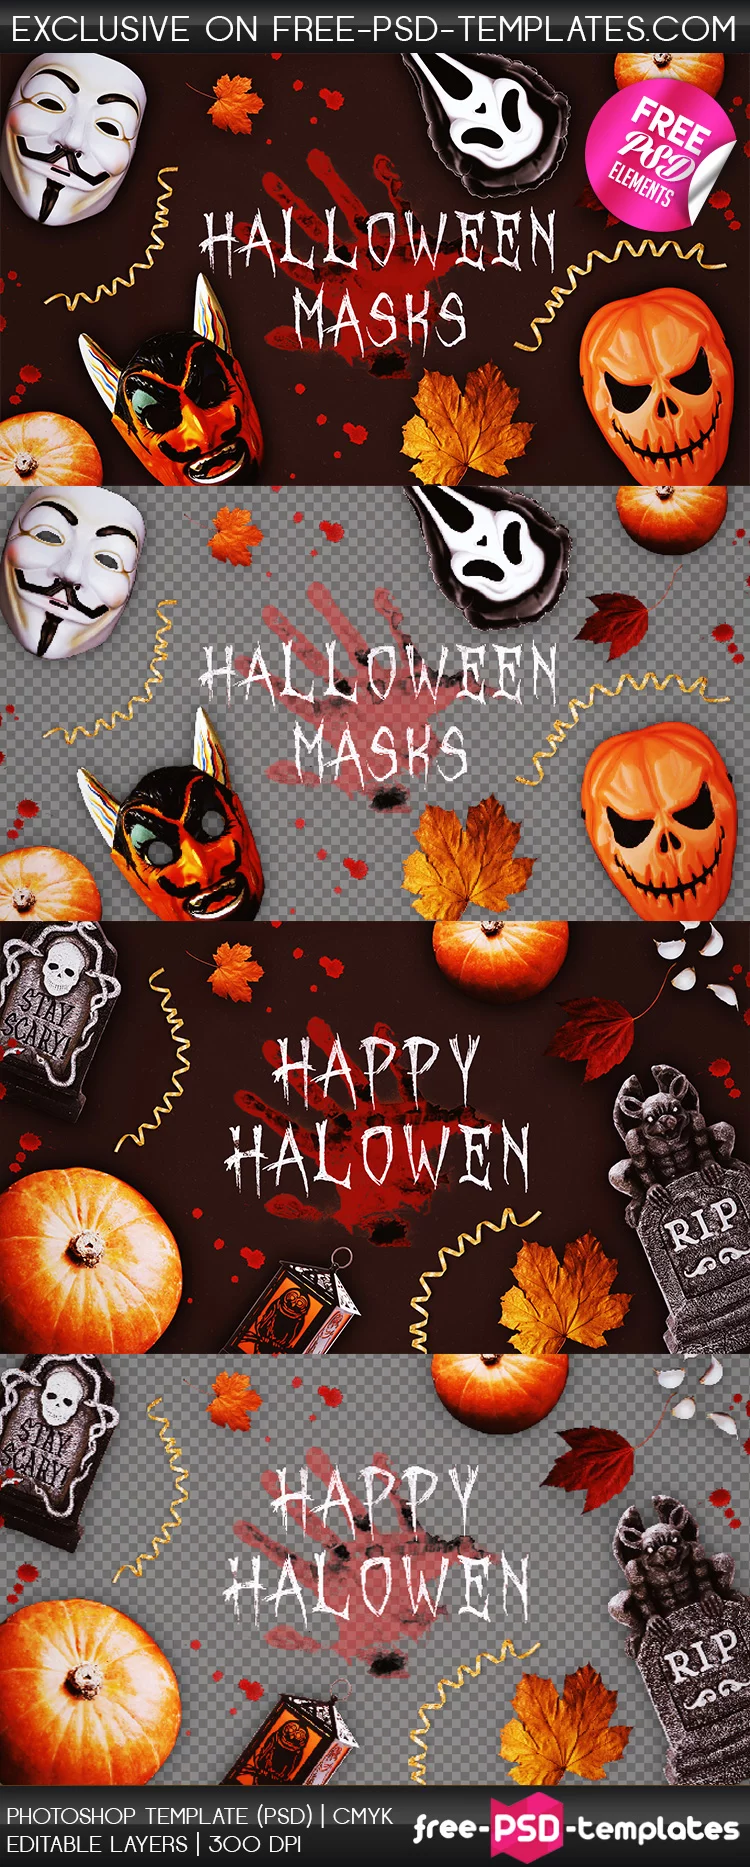 preview_free_transparated_halloween_elements_in_psd